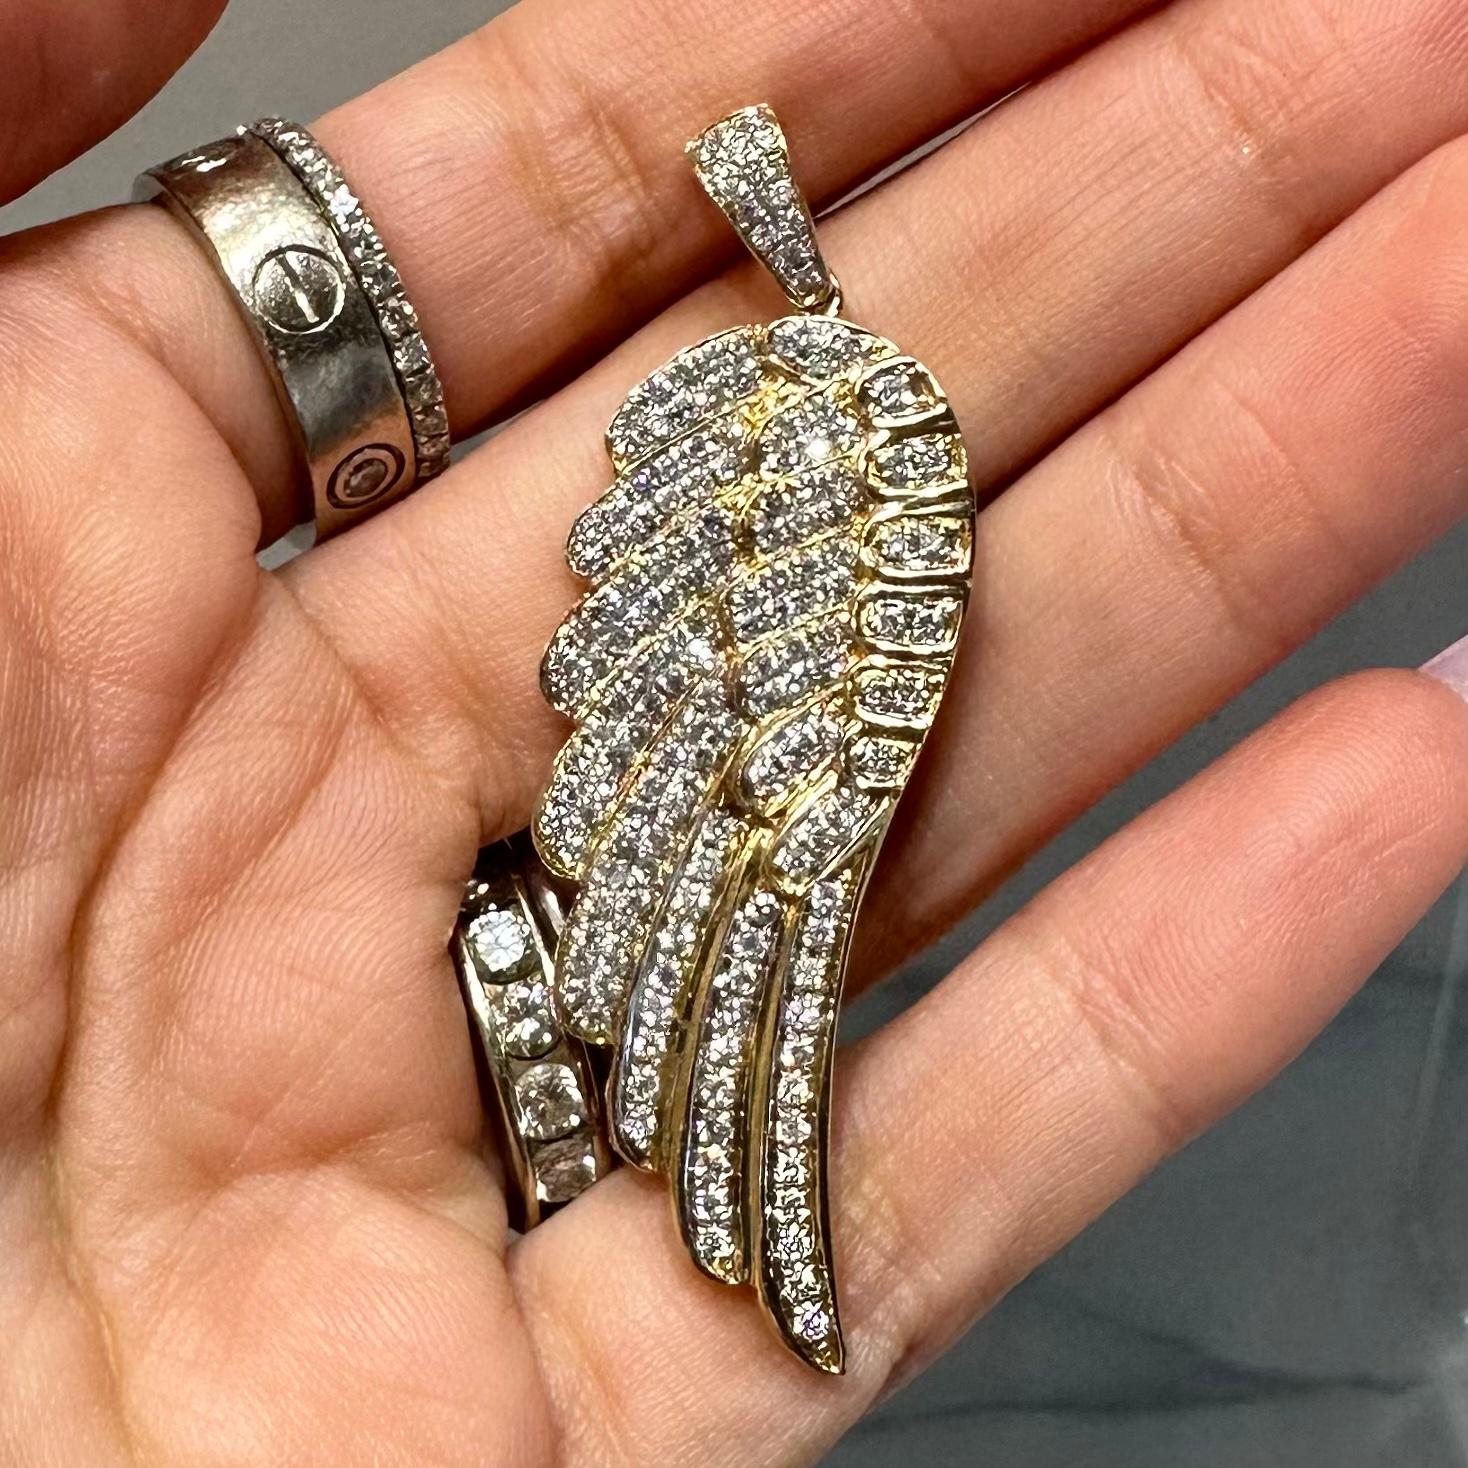 Style: Diamond Wing Pendant

Metal: Yellow Gold

Metal Purity: 14K

Stones: 140 Diamonds

Diamond Color: G-H​​​​​​​

Diamond Clarity: VS2

Total Carat Weight (ct): 1.96 ct

Total Item Weight (g): 12. g 

Dimensions: 5.5 in x 1.2 in (including